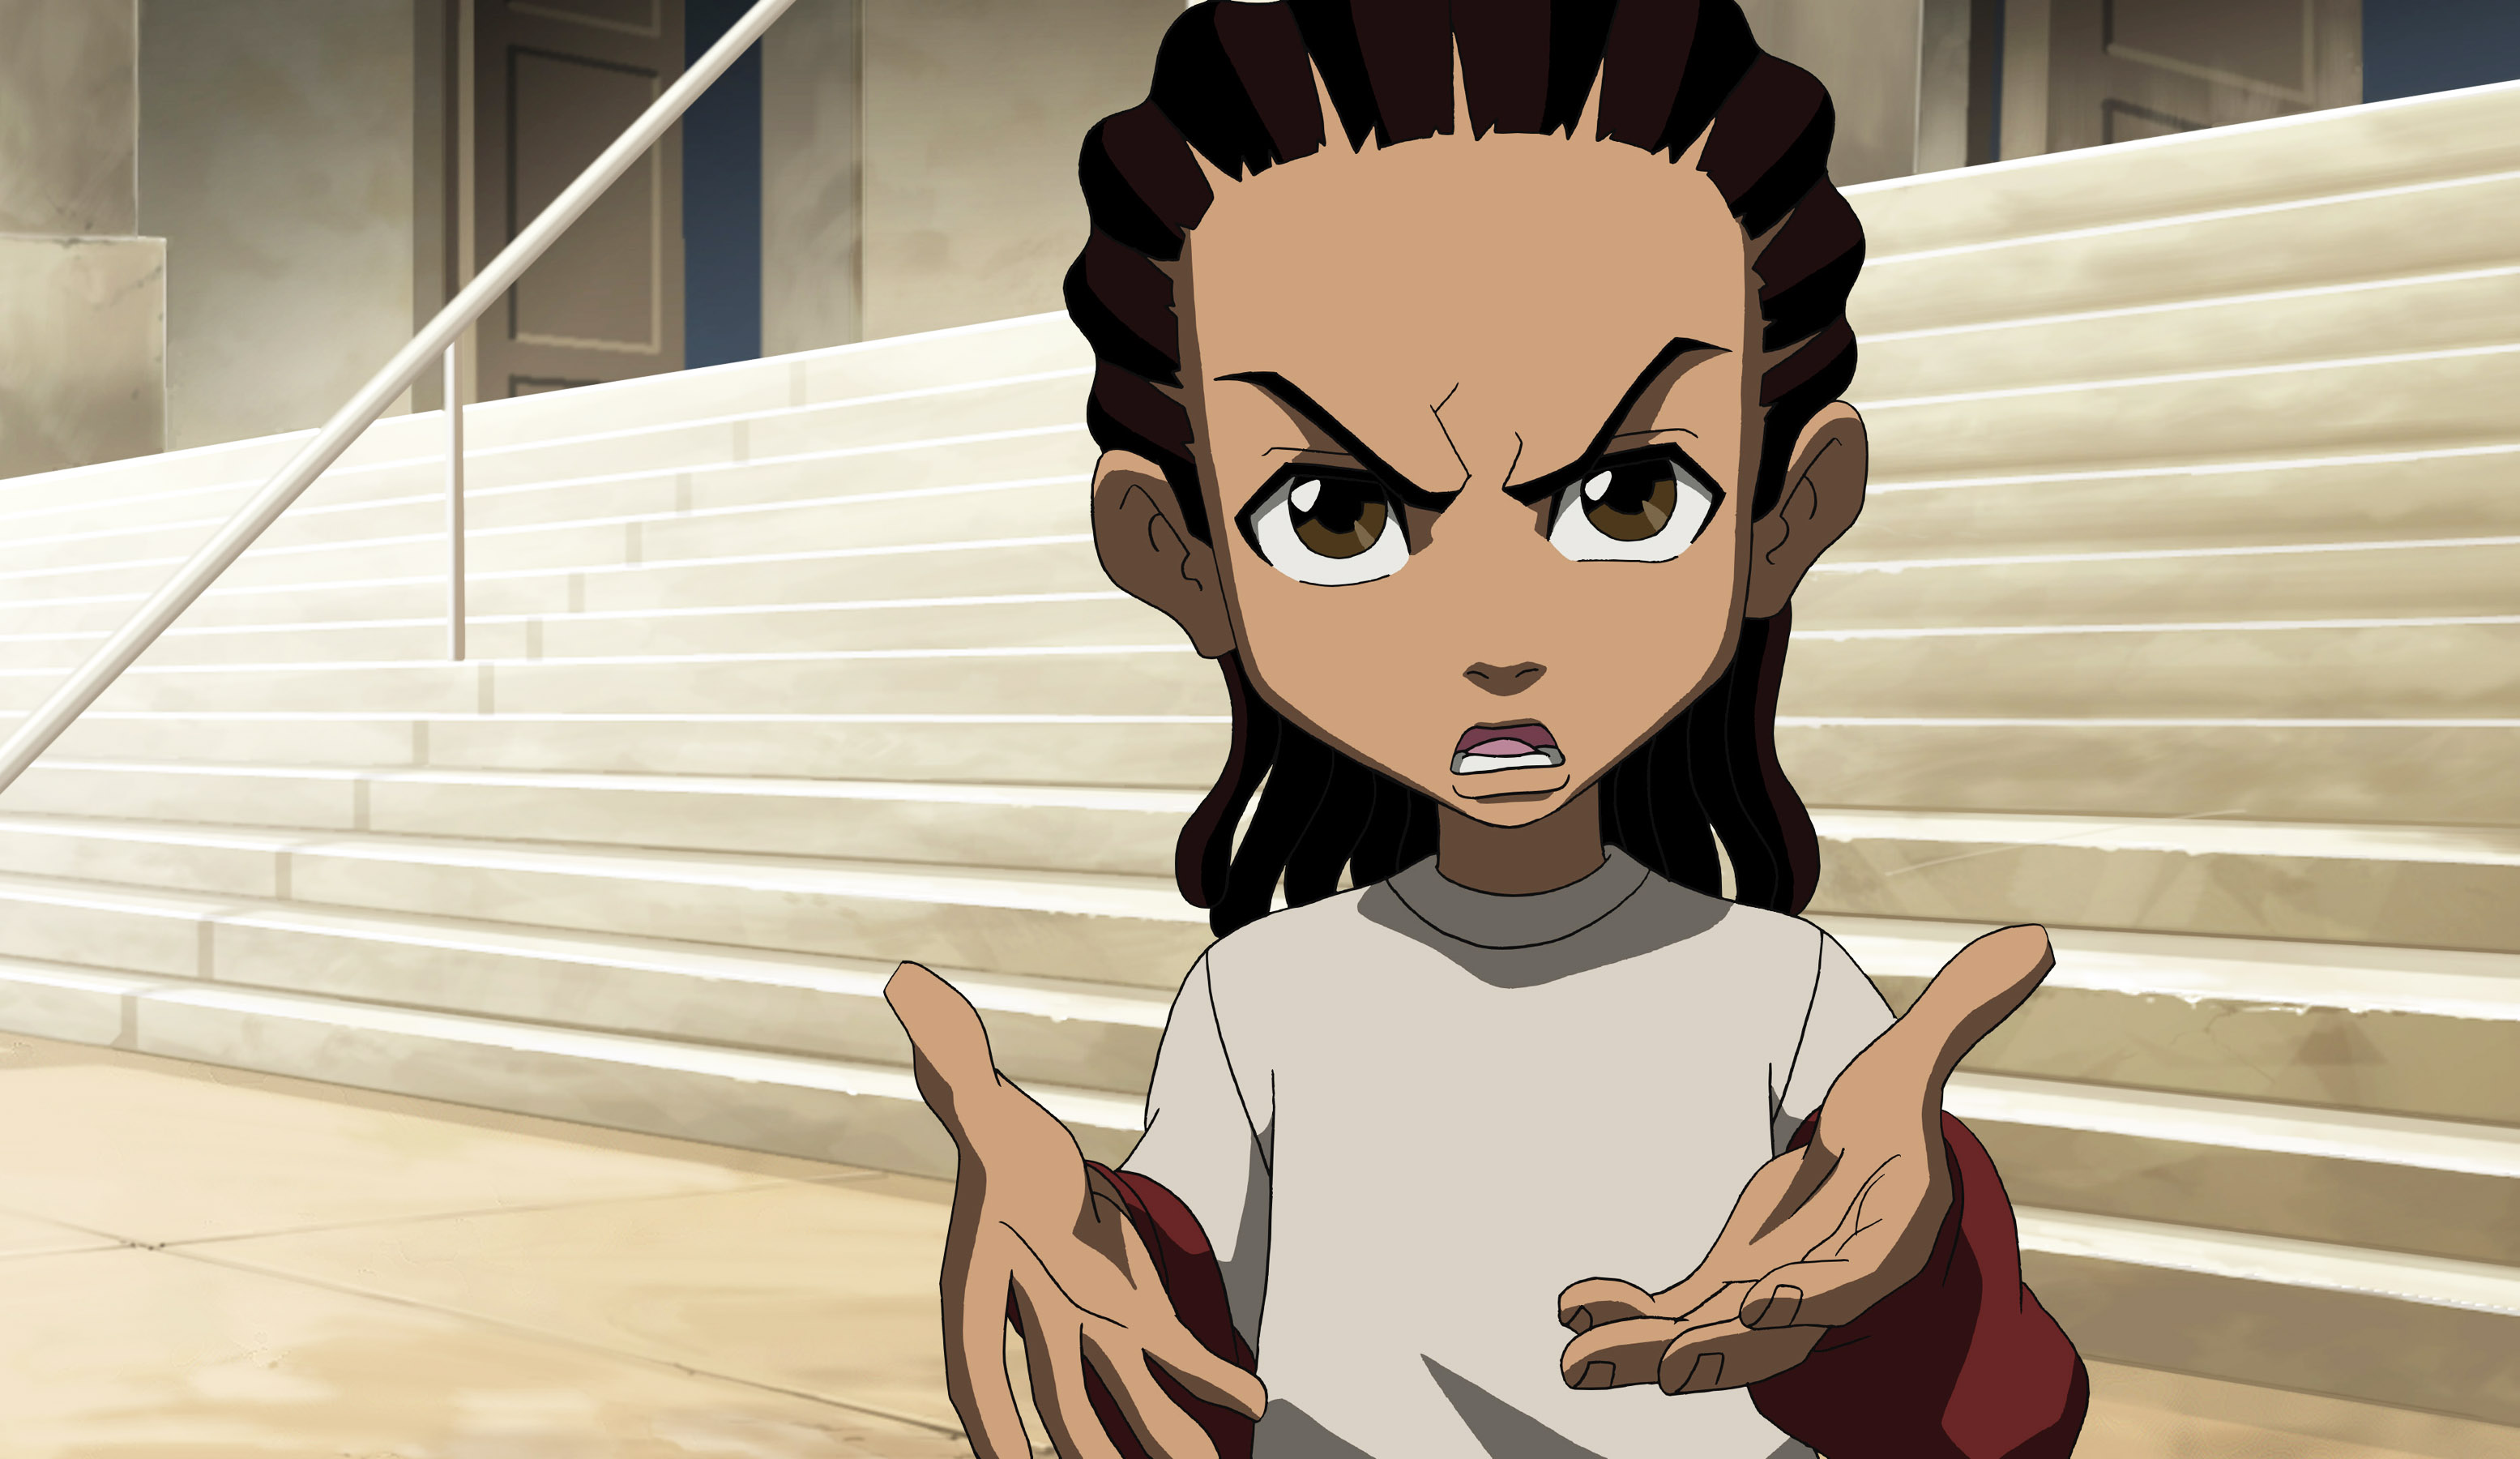 Seitz on The Boondocks Season 4 Whats Wrong With This Picture